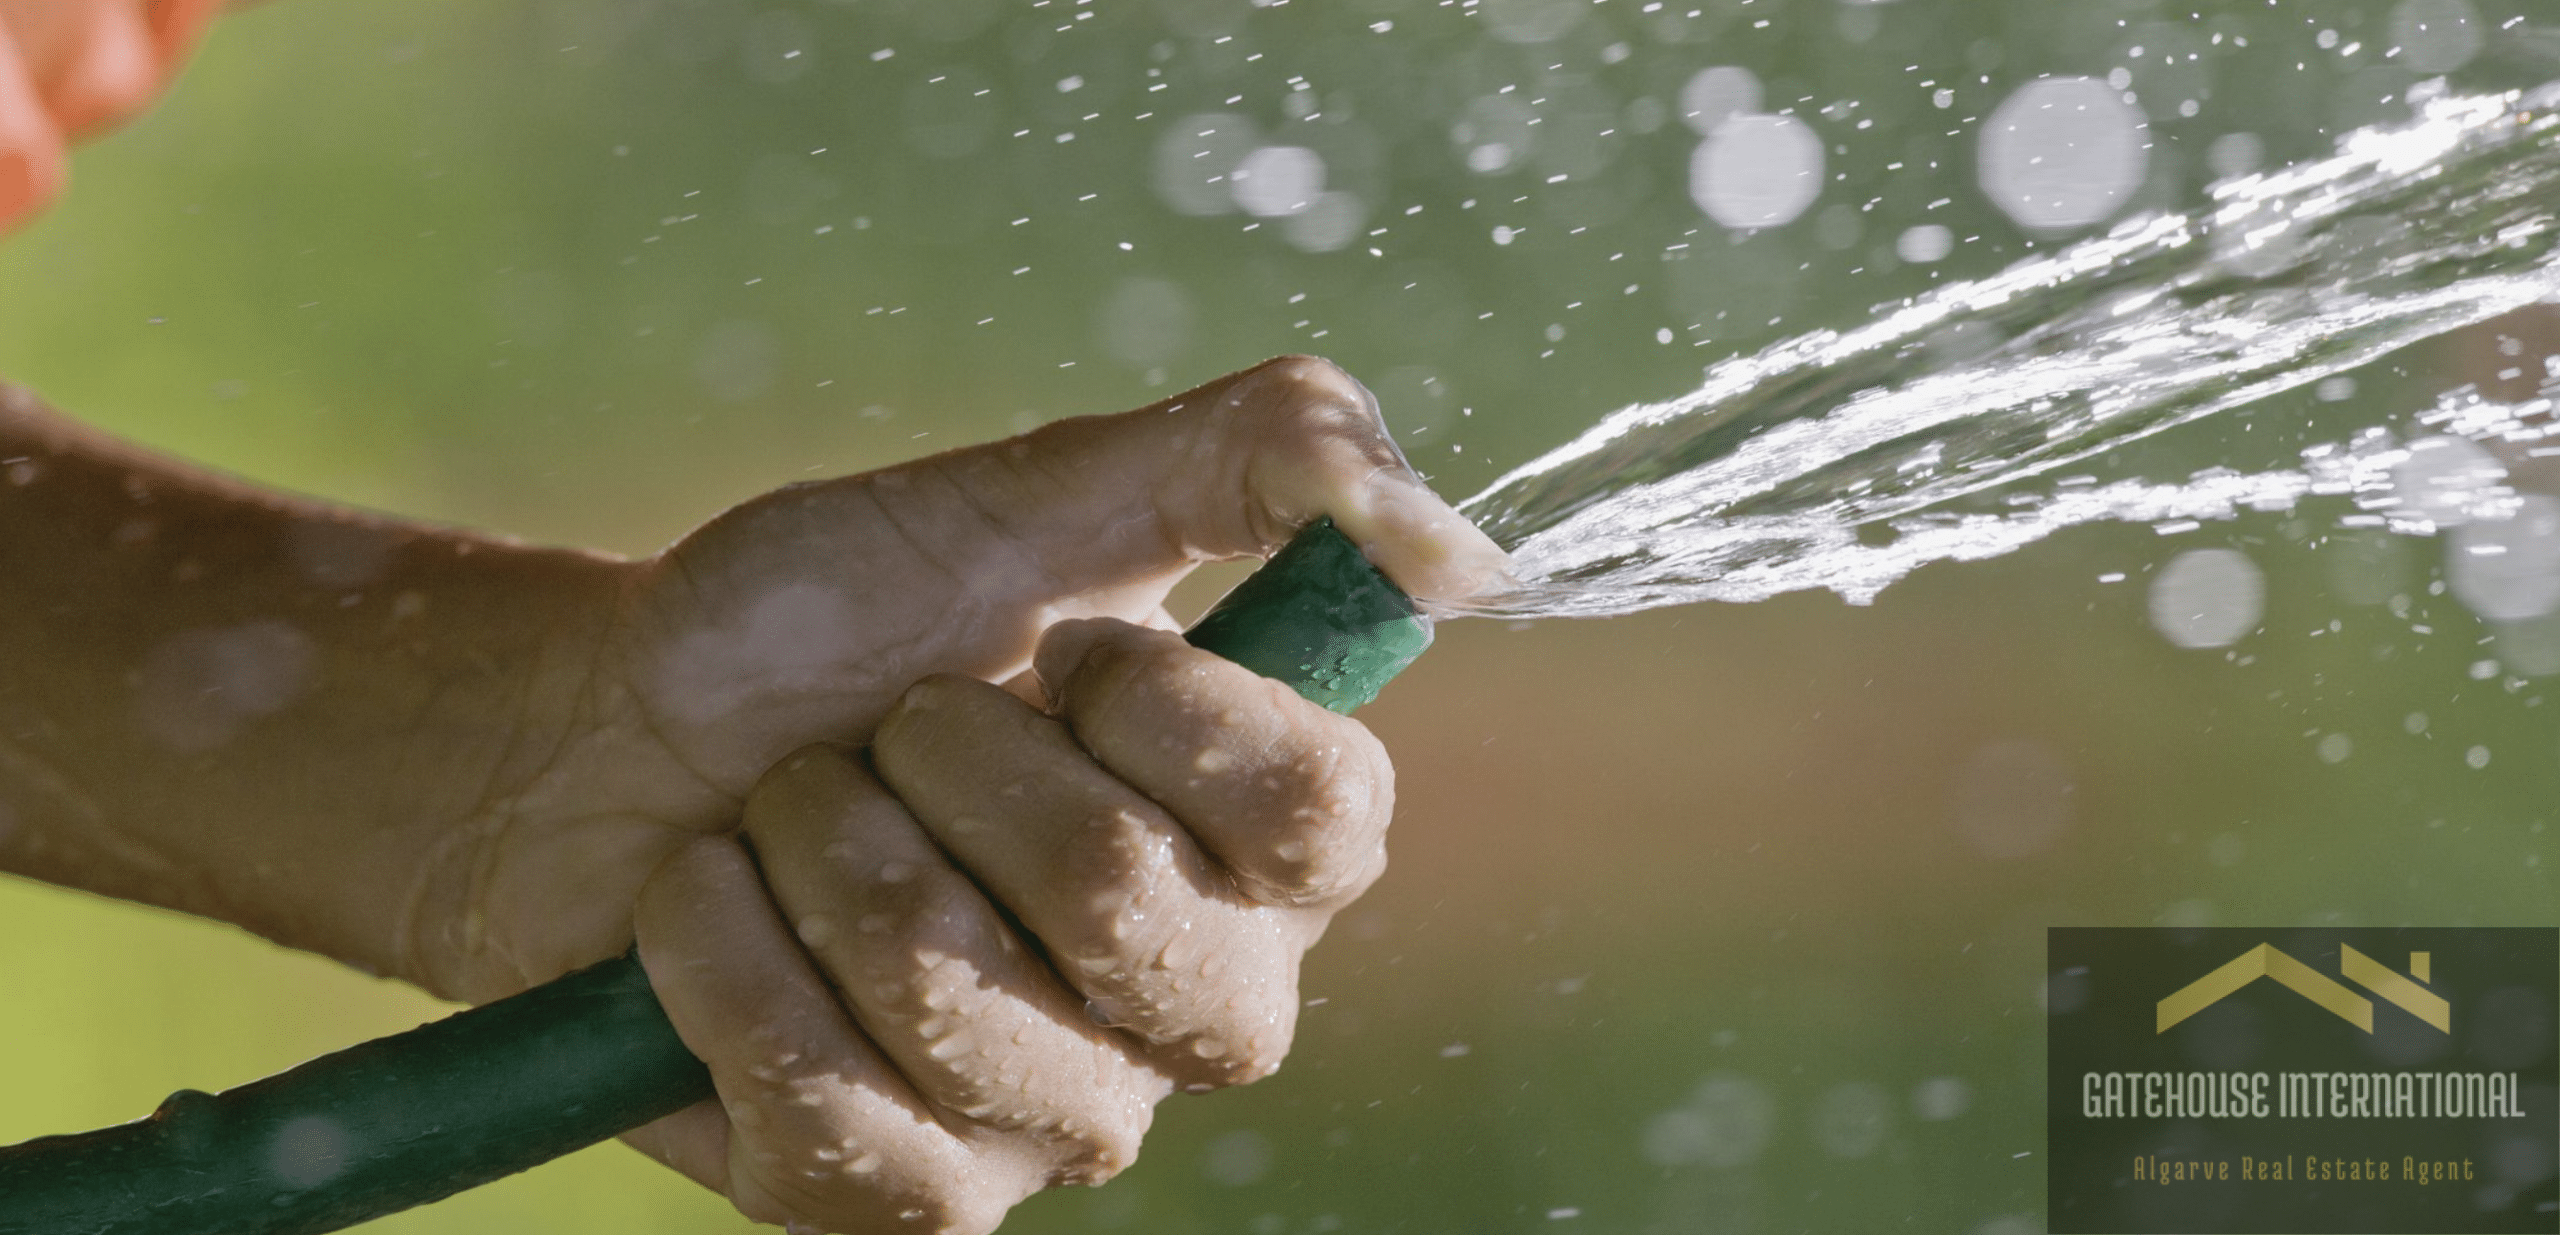 How much does it cost to install a sprinkler system in your Algarve garden